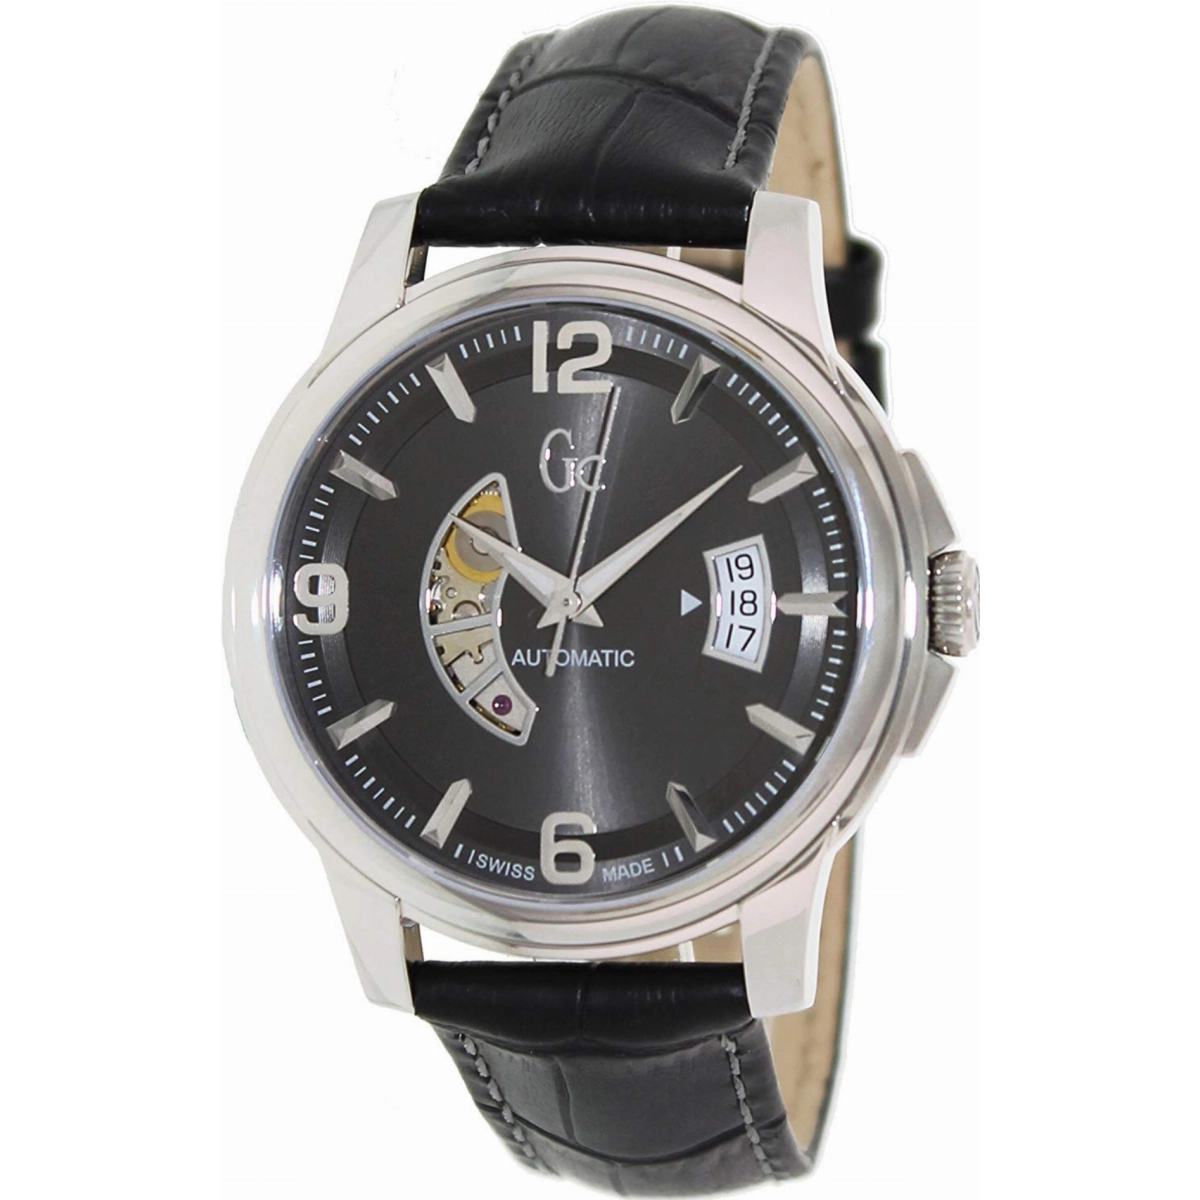 WATCH ANALOG MENS GUESS X84003G5S Gc